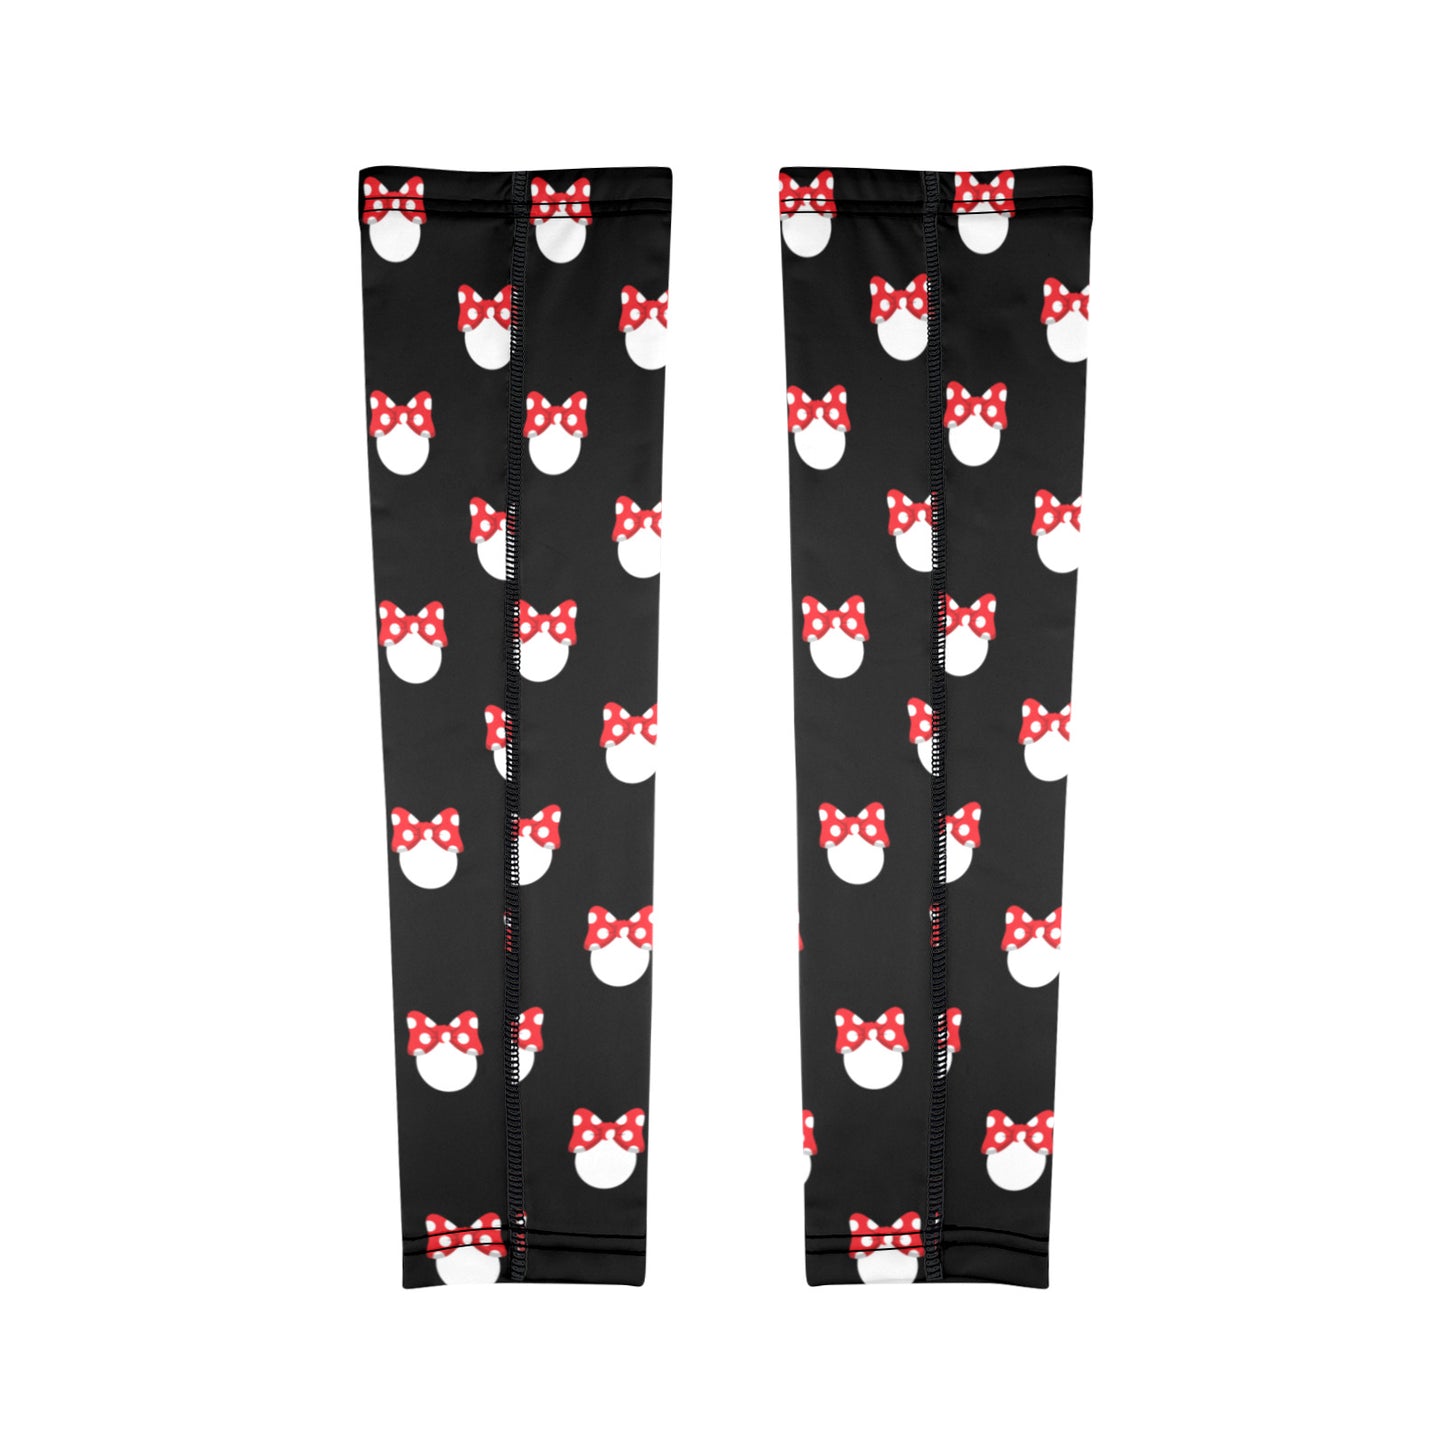 White Polka Dot Red Bow Arm Sleeves (Set of Two)